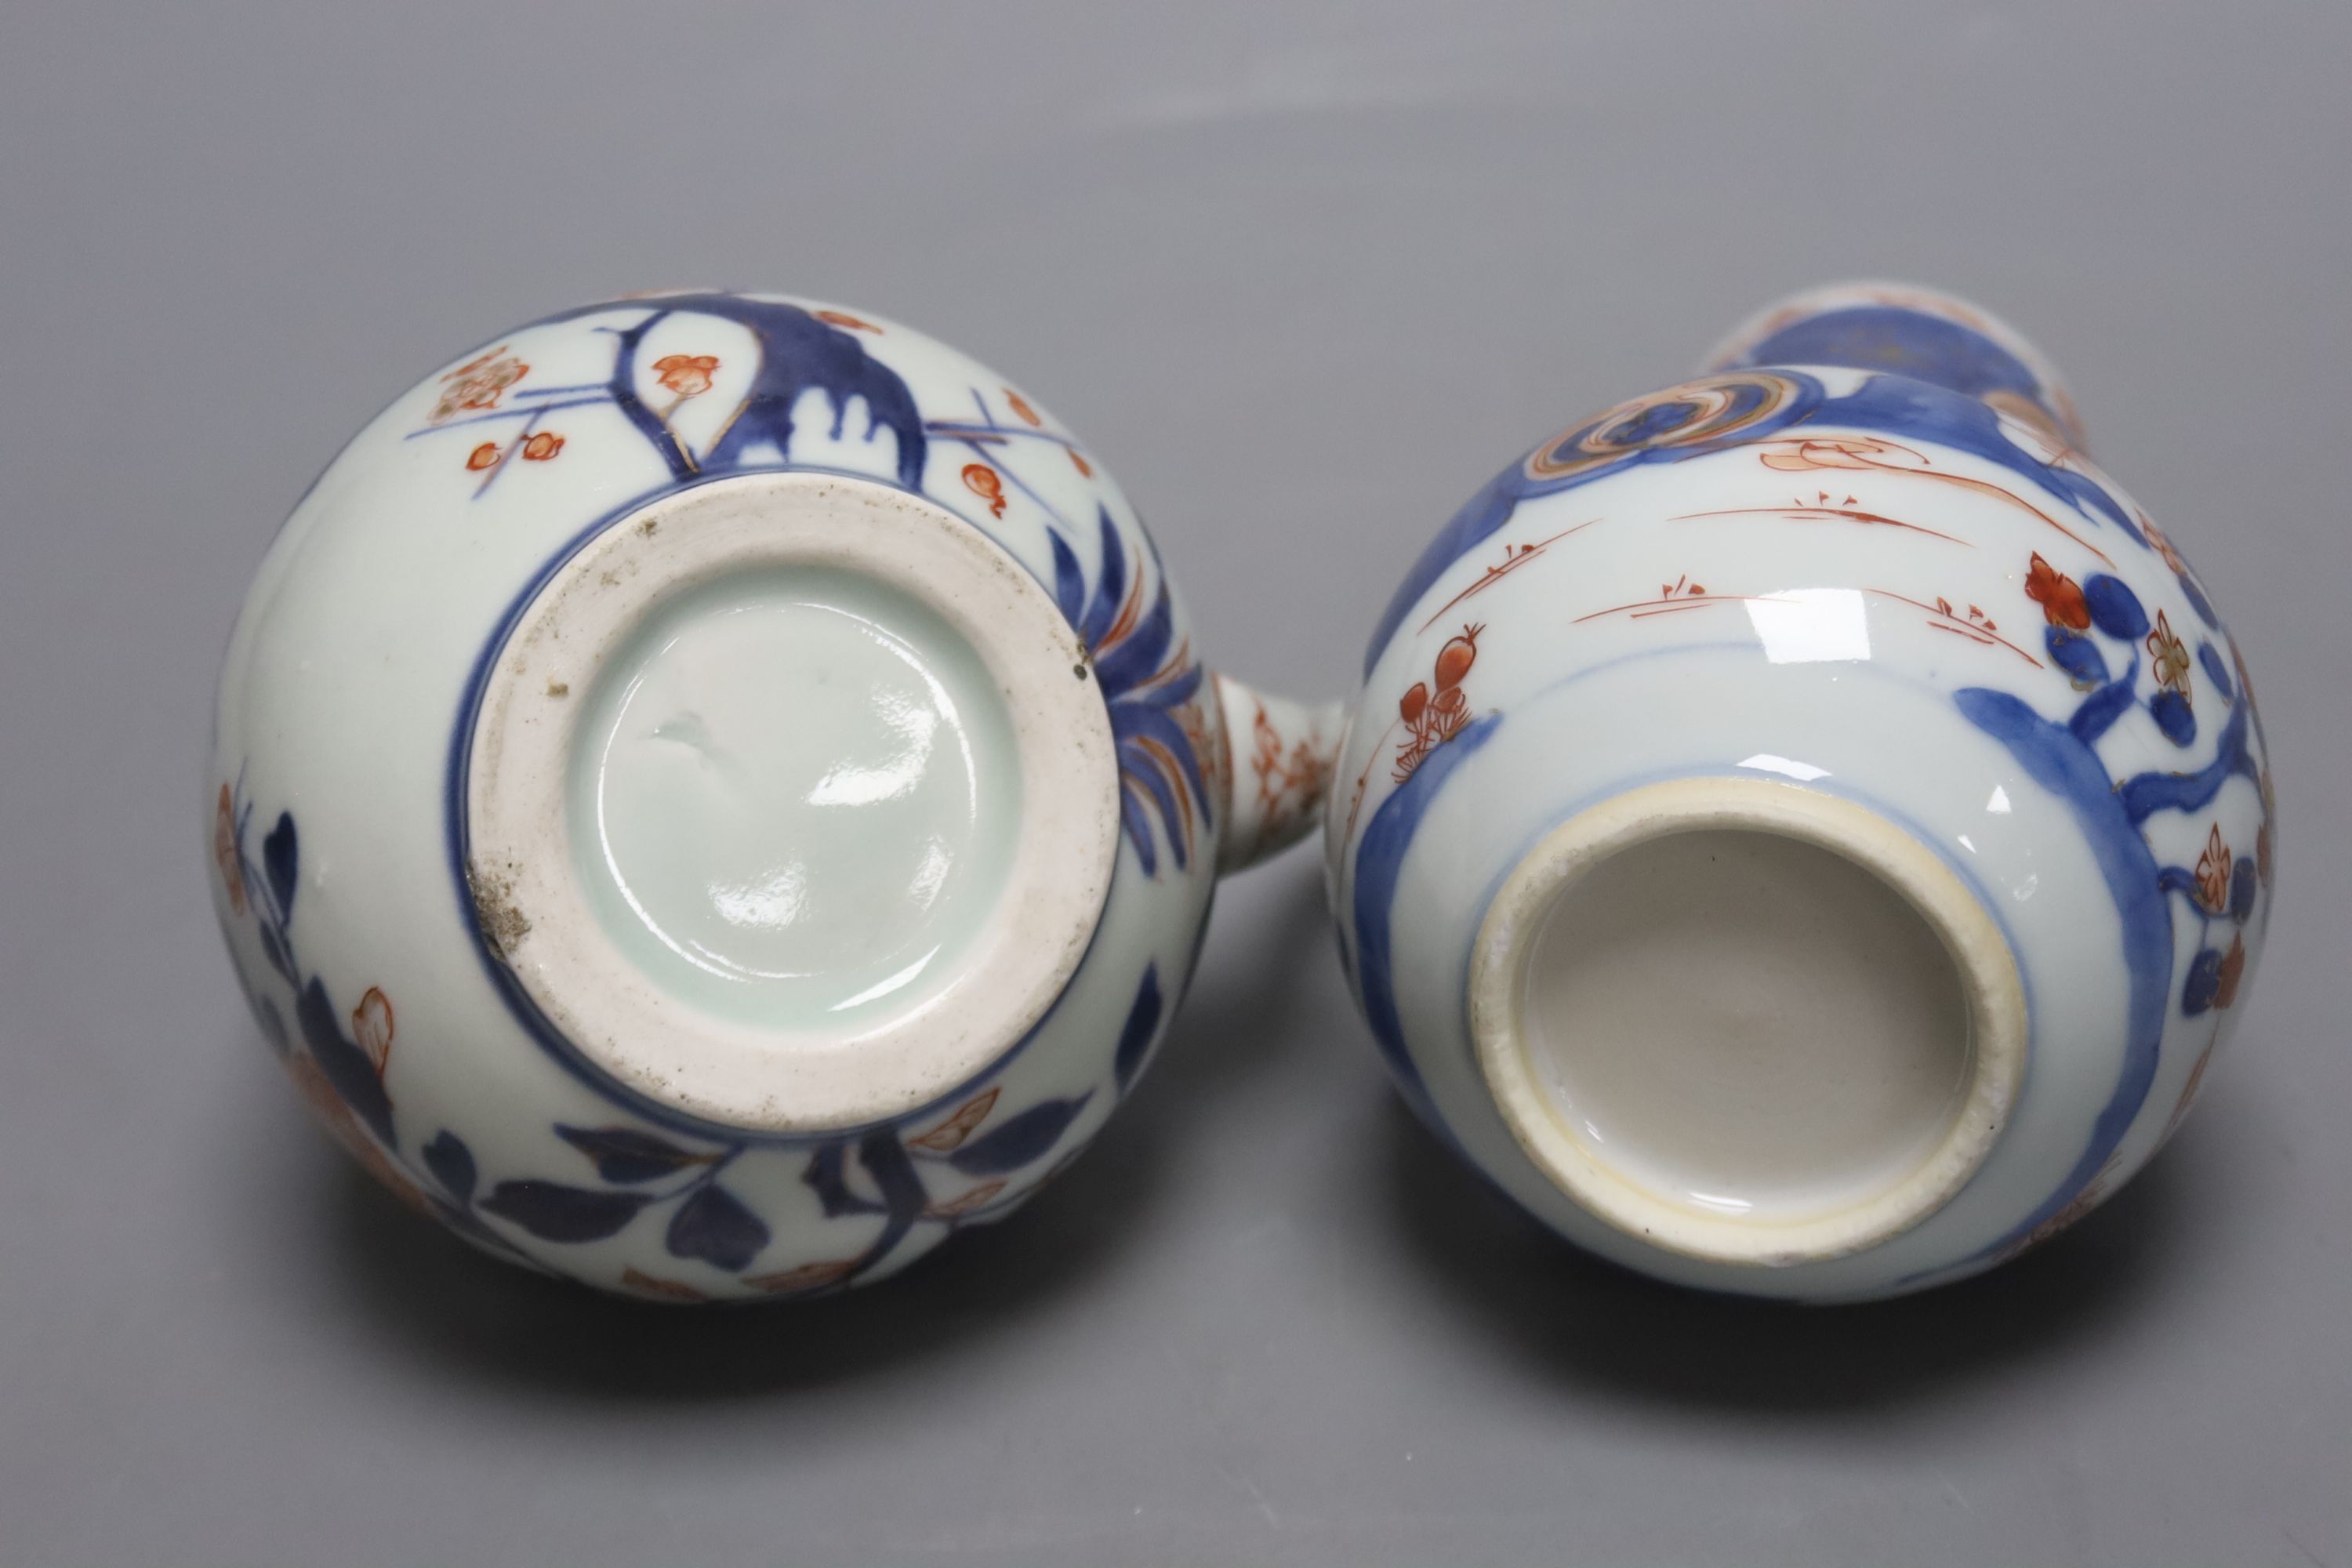 A pair of 18th century Chinese Imari style dishes, diameter 22.5cm, together with a similar chocolate pot and an 18th century Japanese Arita teapot, associated cover